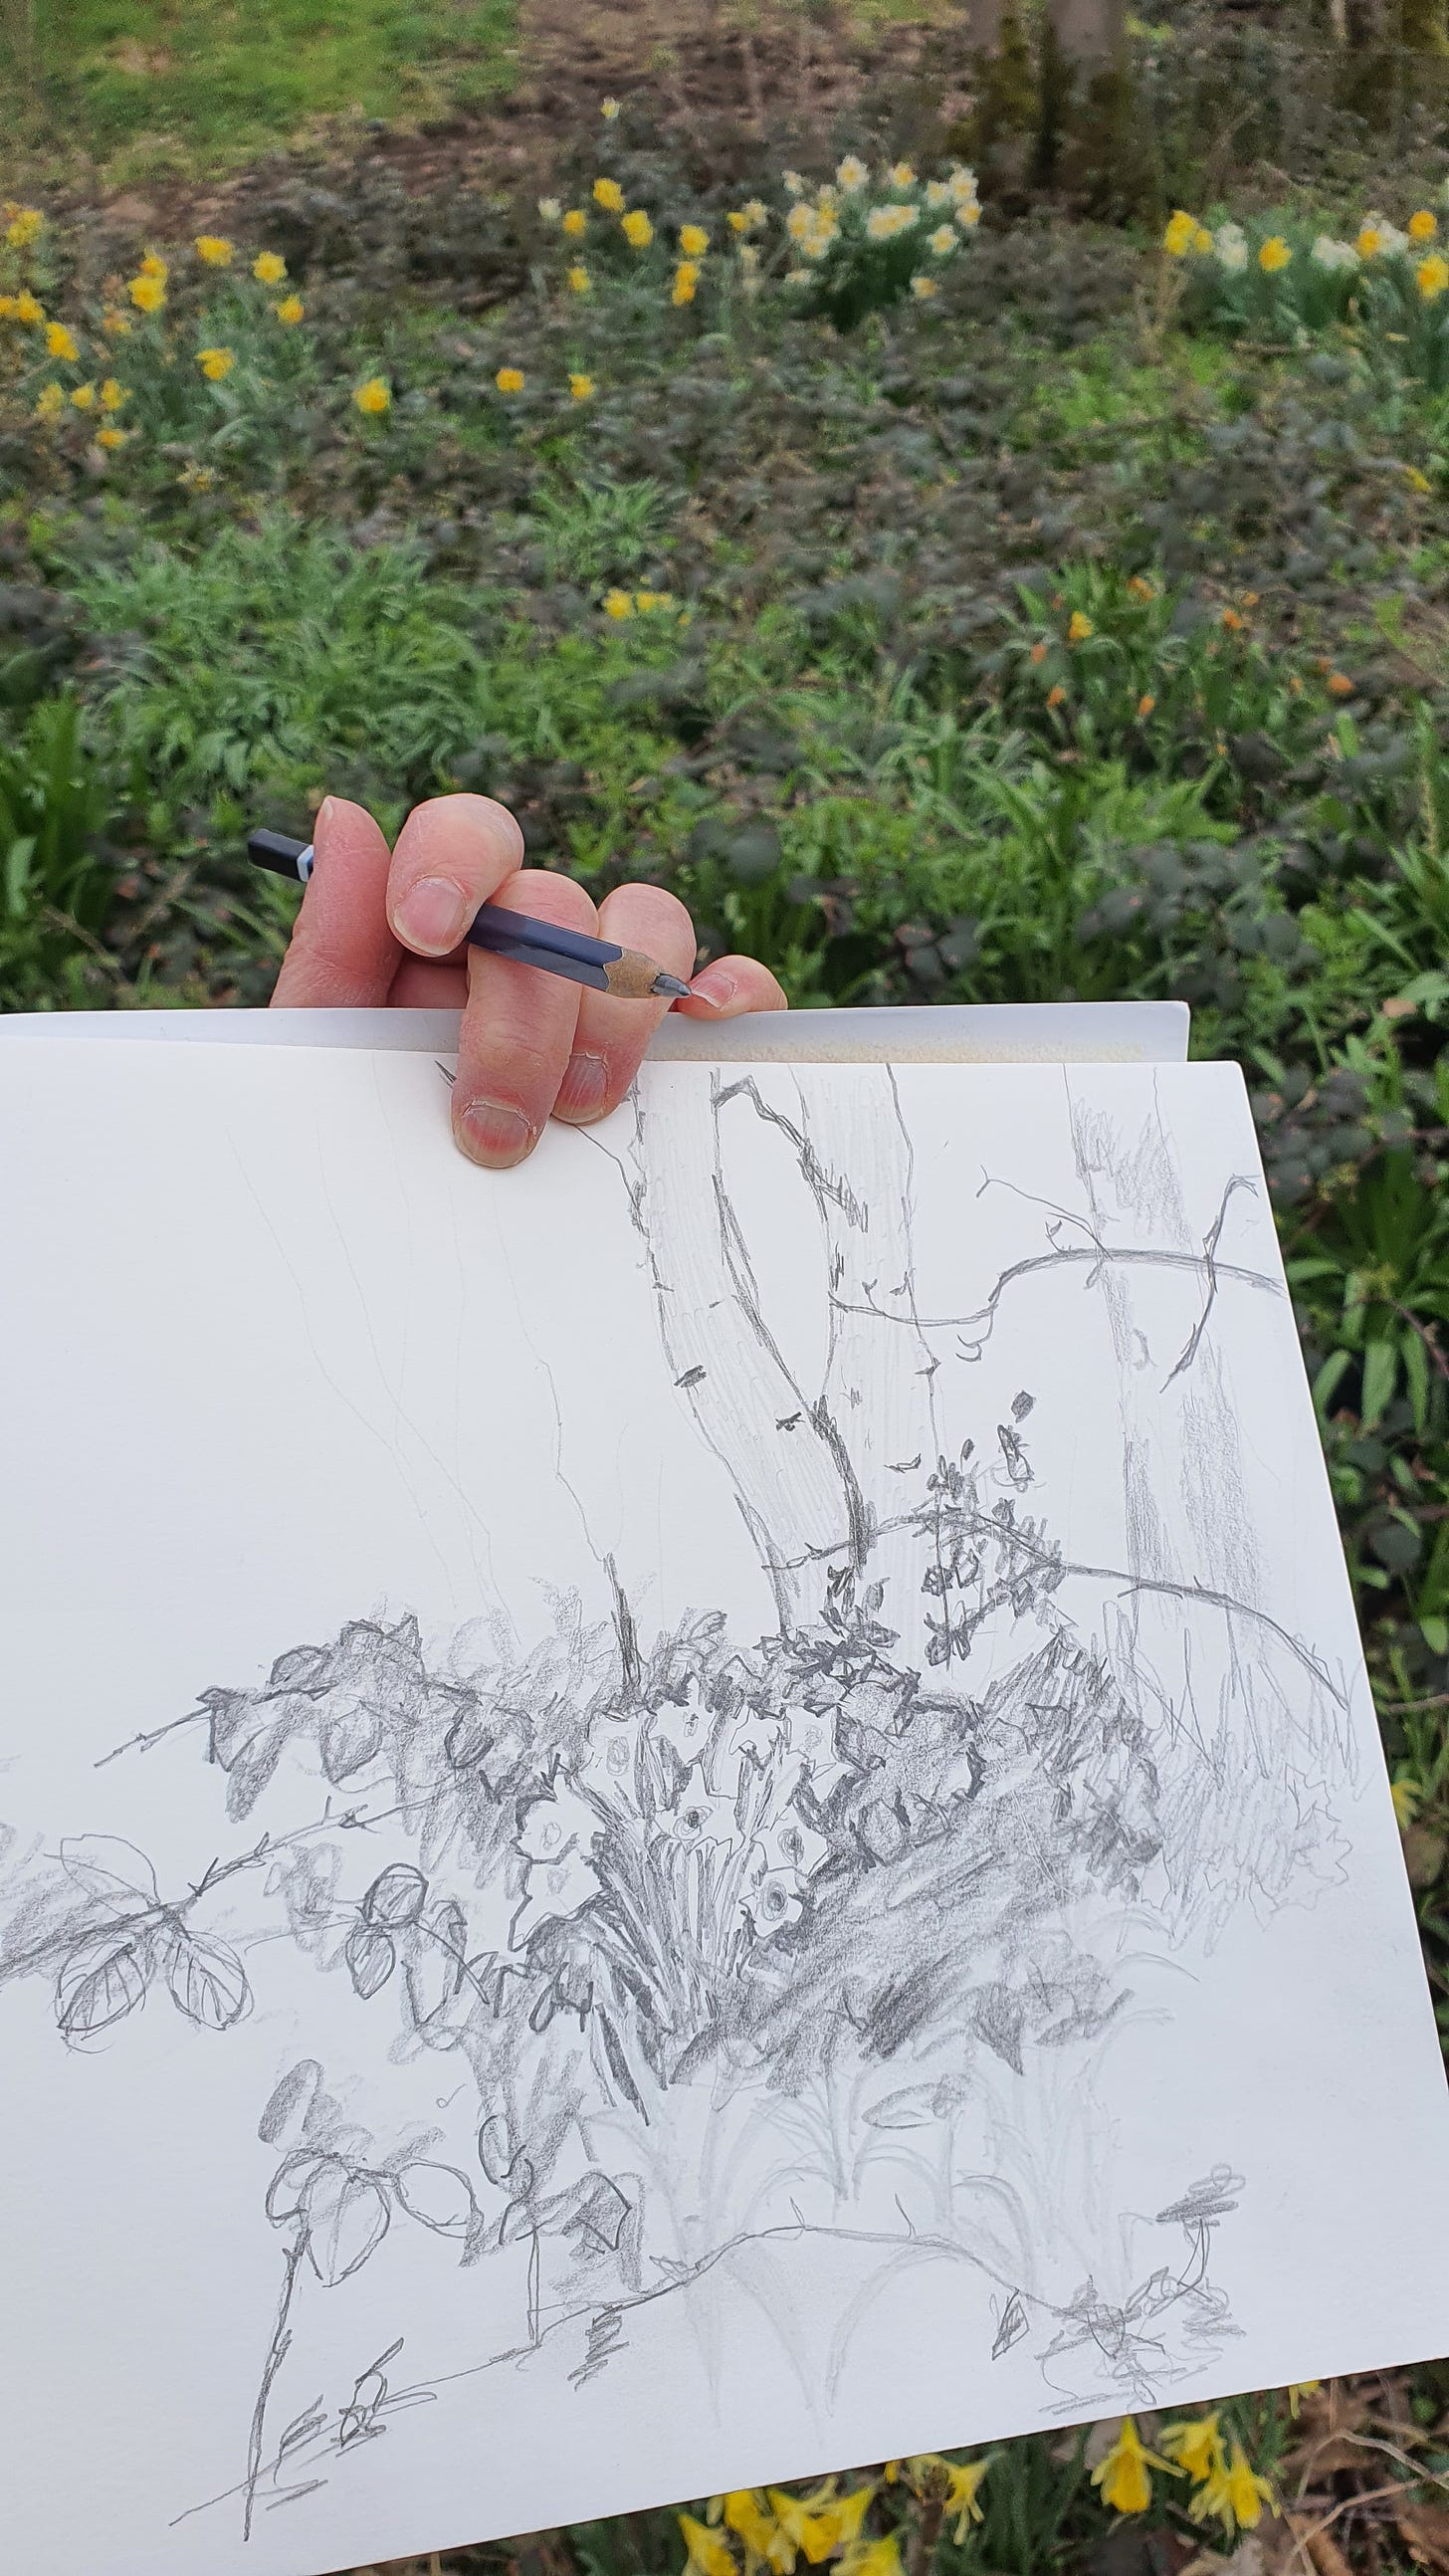 Susan Mills hand holding a sketchpad and pencil with a sketch of trees, undergrowth and daffodils